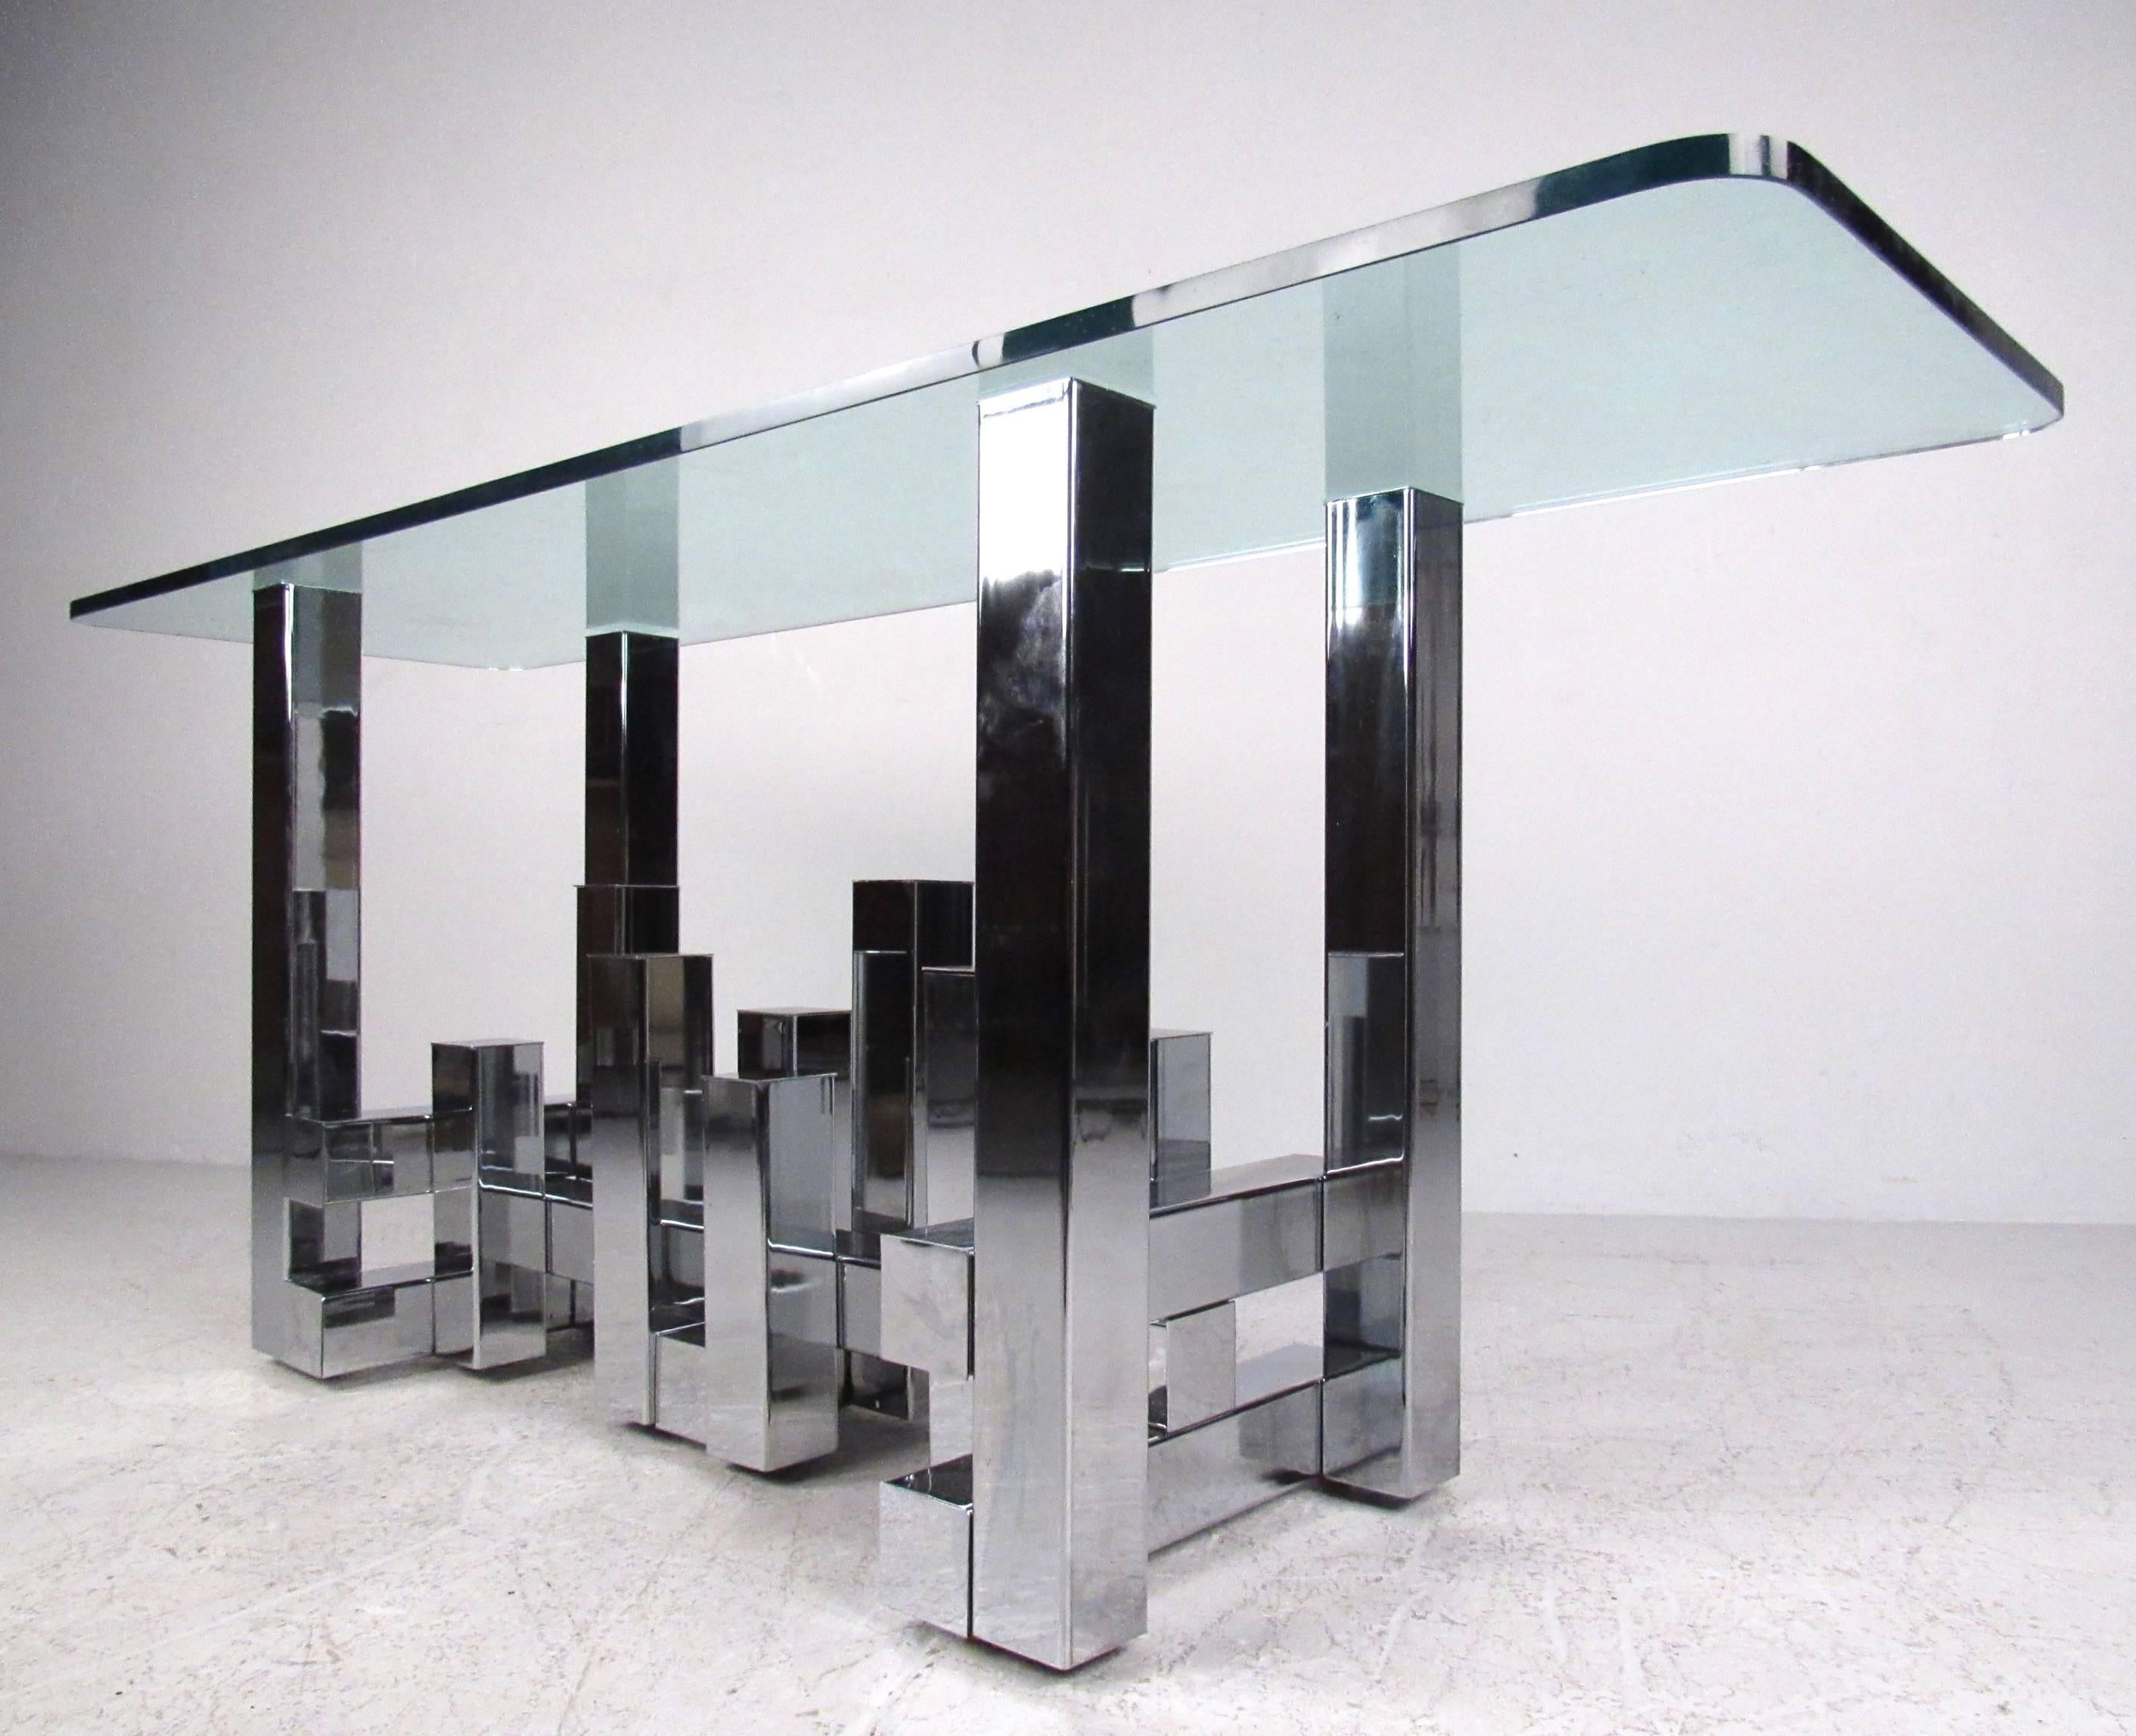 This stunning Paul Evans' style console table features heavy chrome construction in a cityscape type design. Polished metal base supports a thick glass top, making this console table a stylish display piece for any interior. Please confirm item